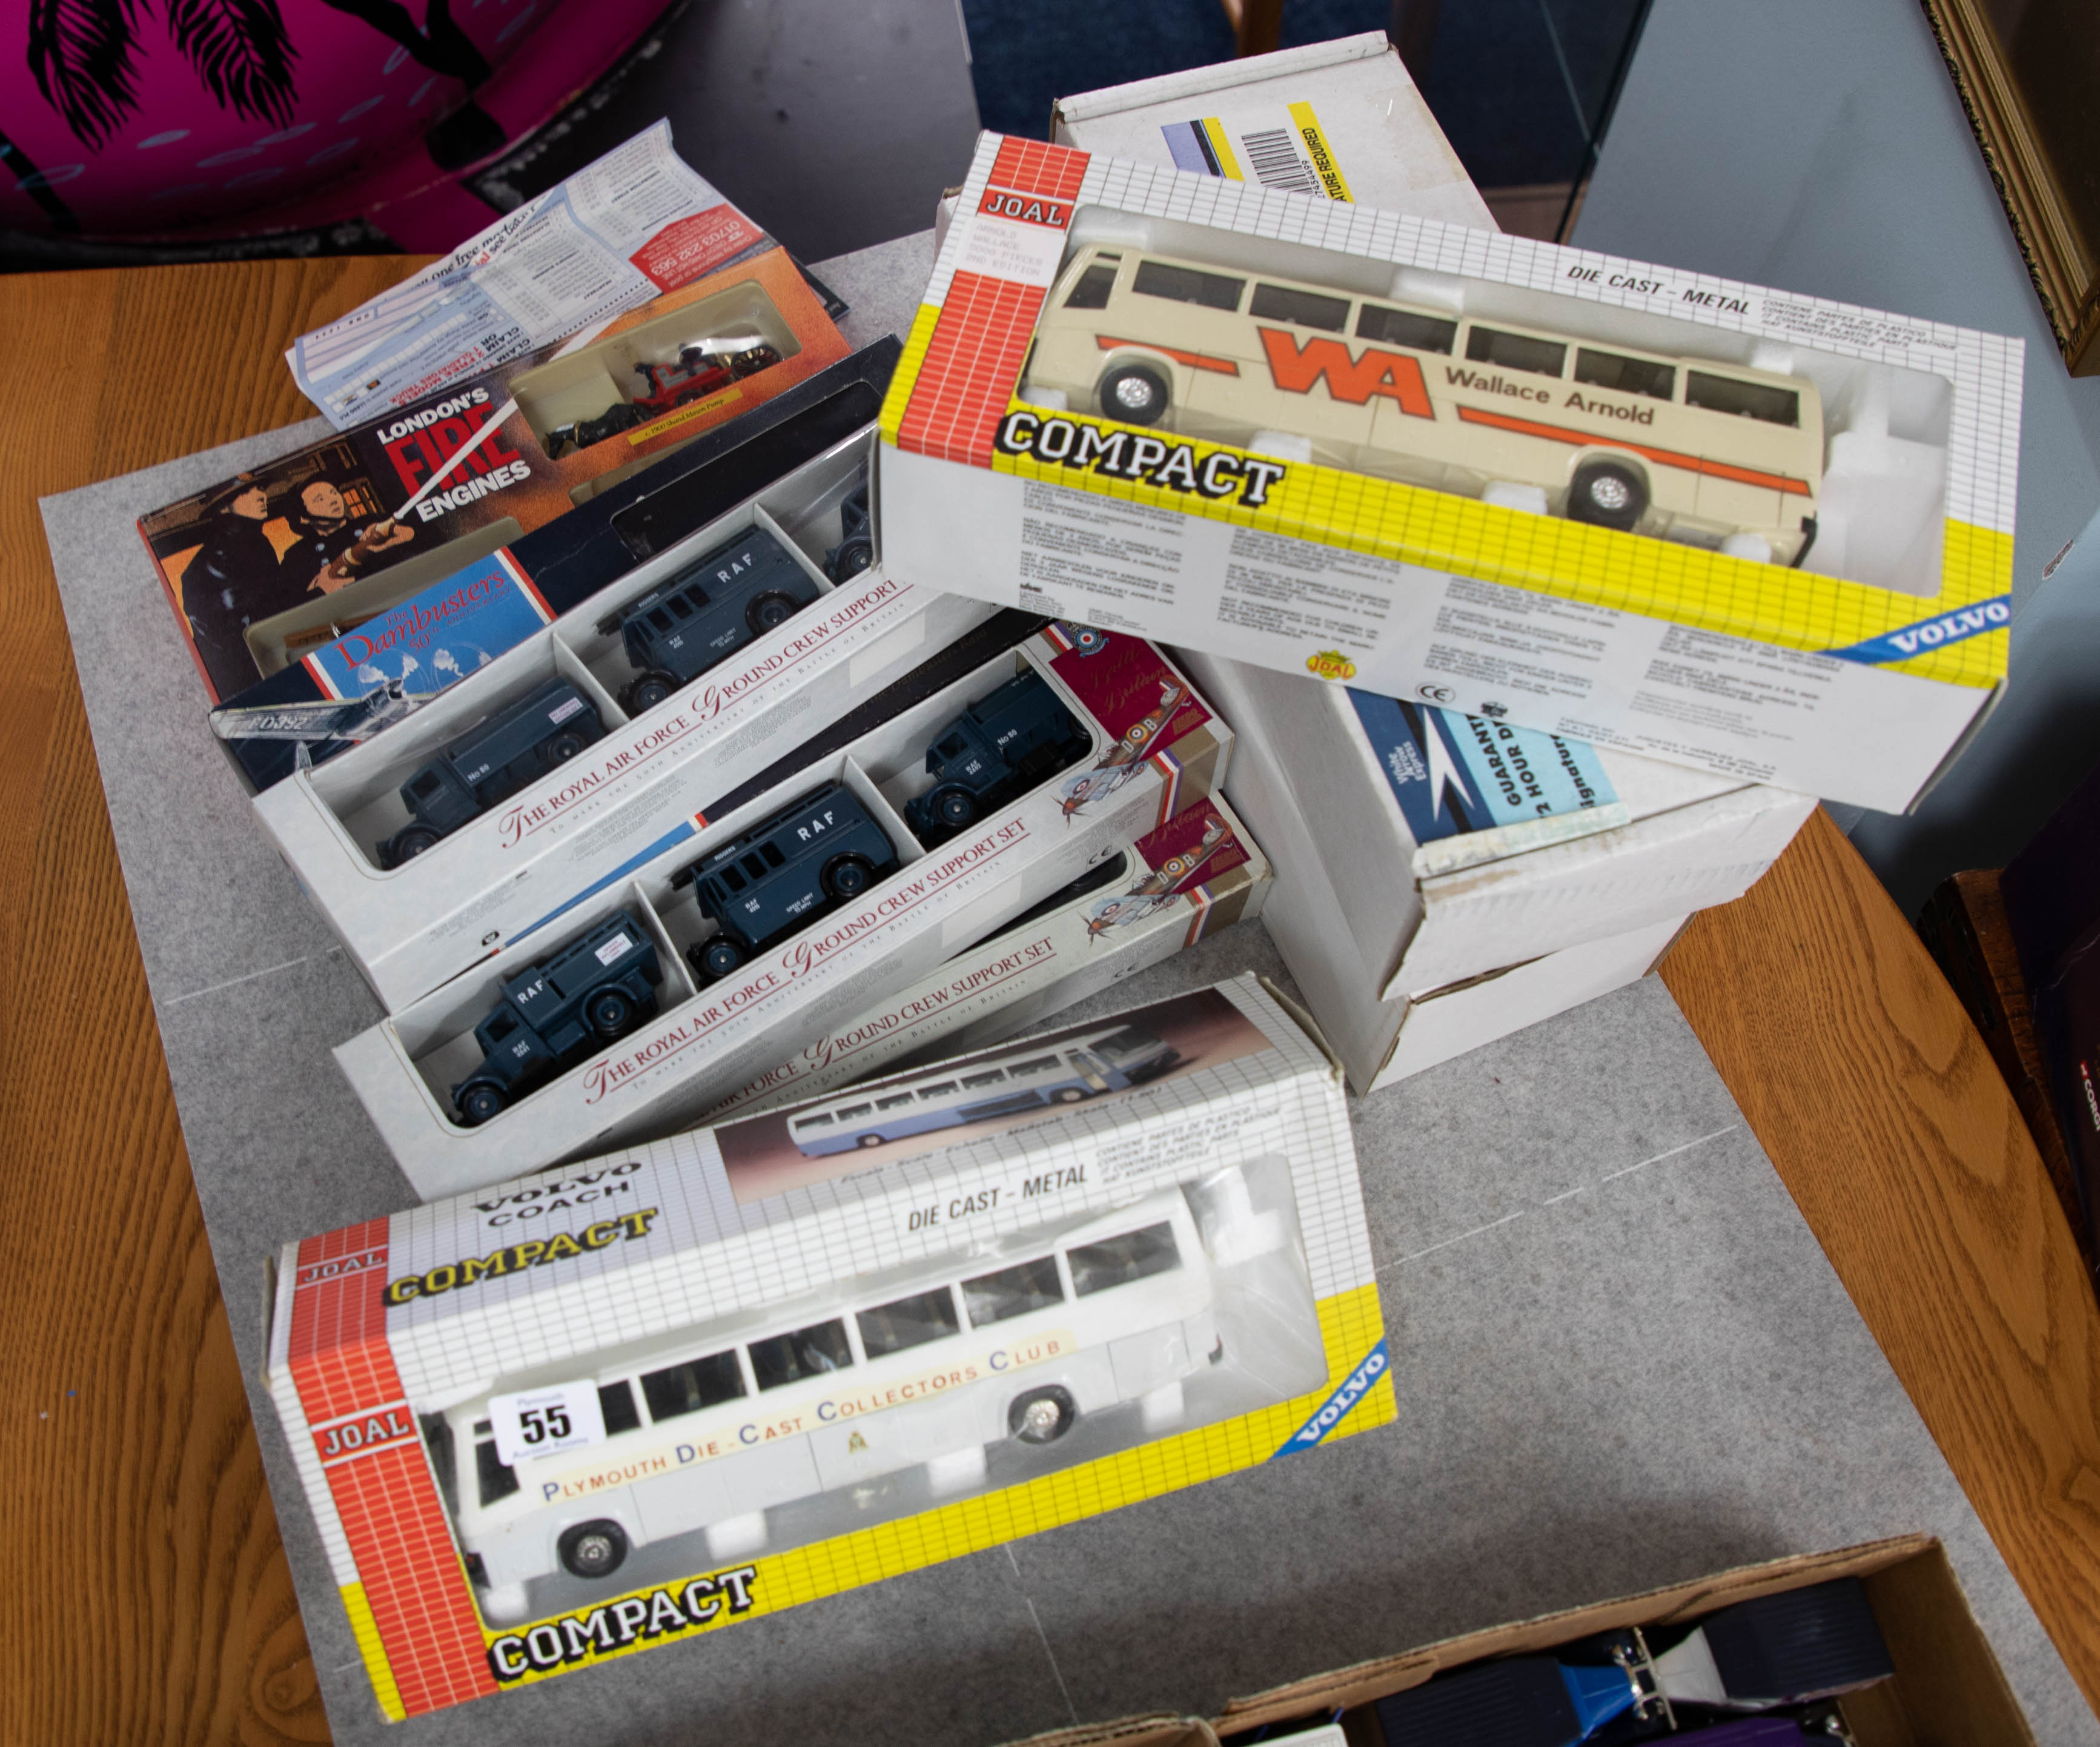 Joal, two compact diecast coach models, also Lledo RAF sets, Fire Engines etc, boxed (10).